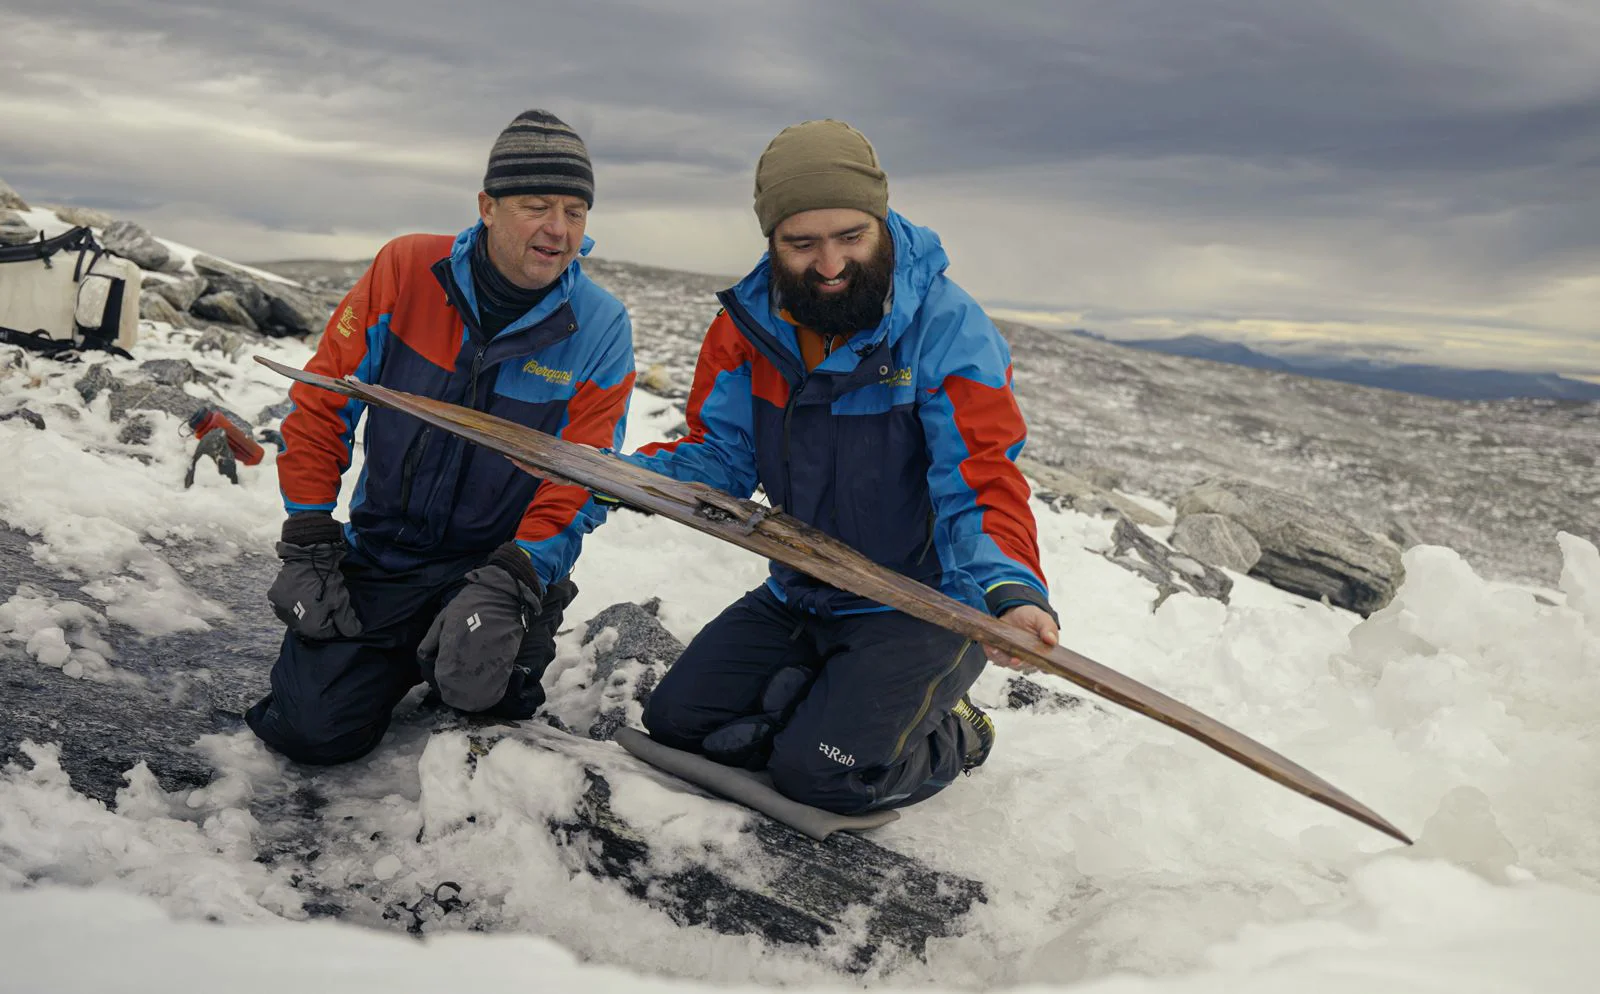 Historic ski discovery in Norway